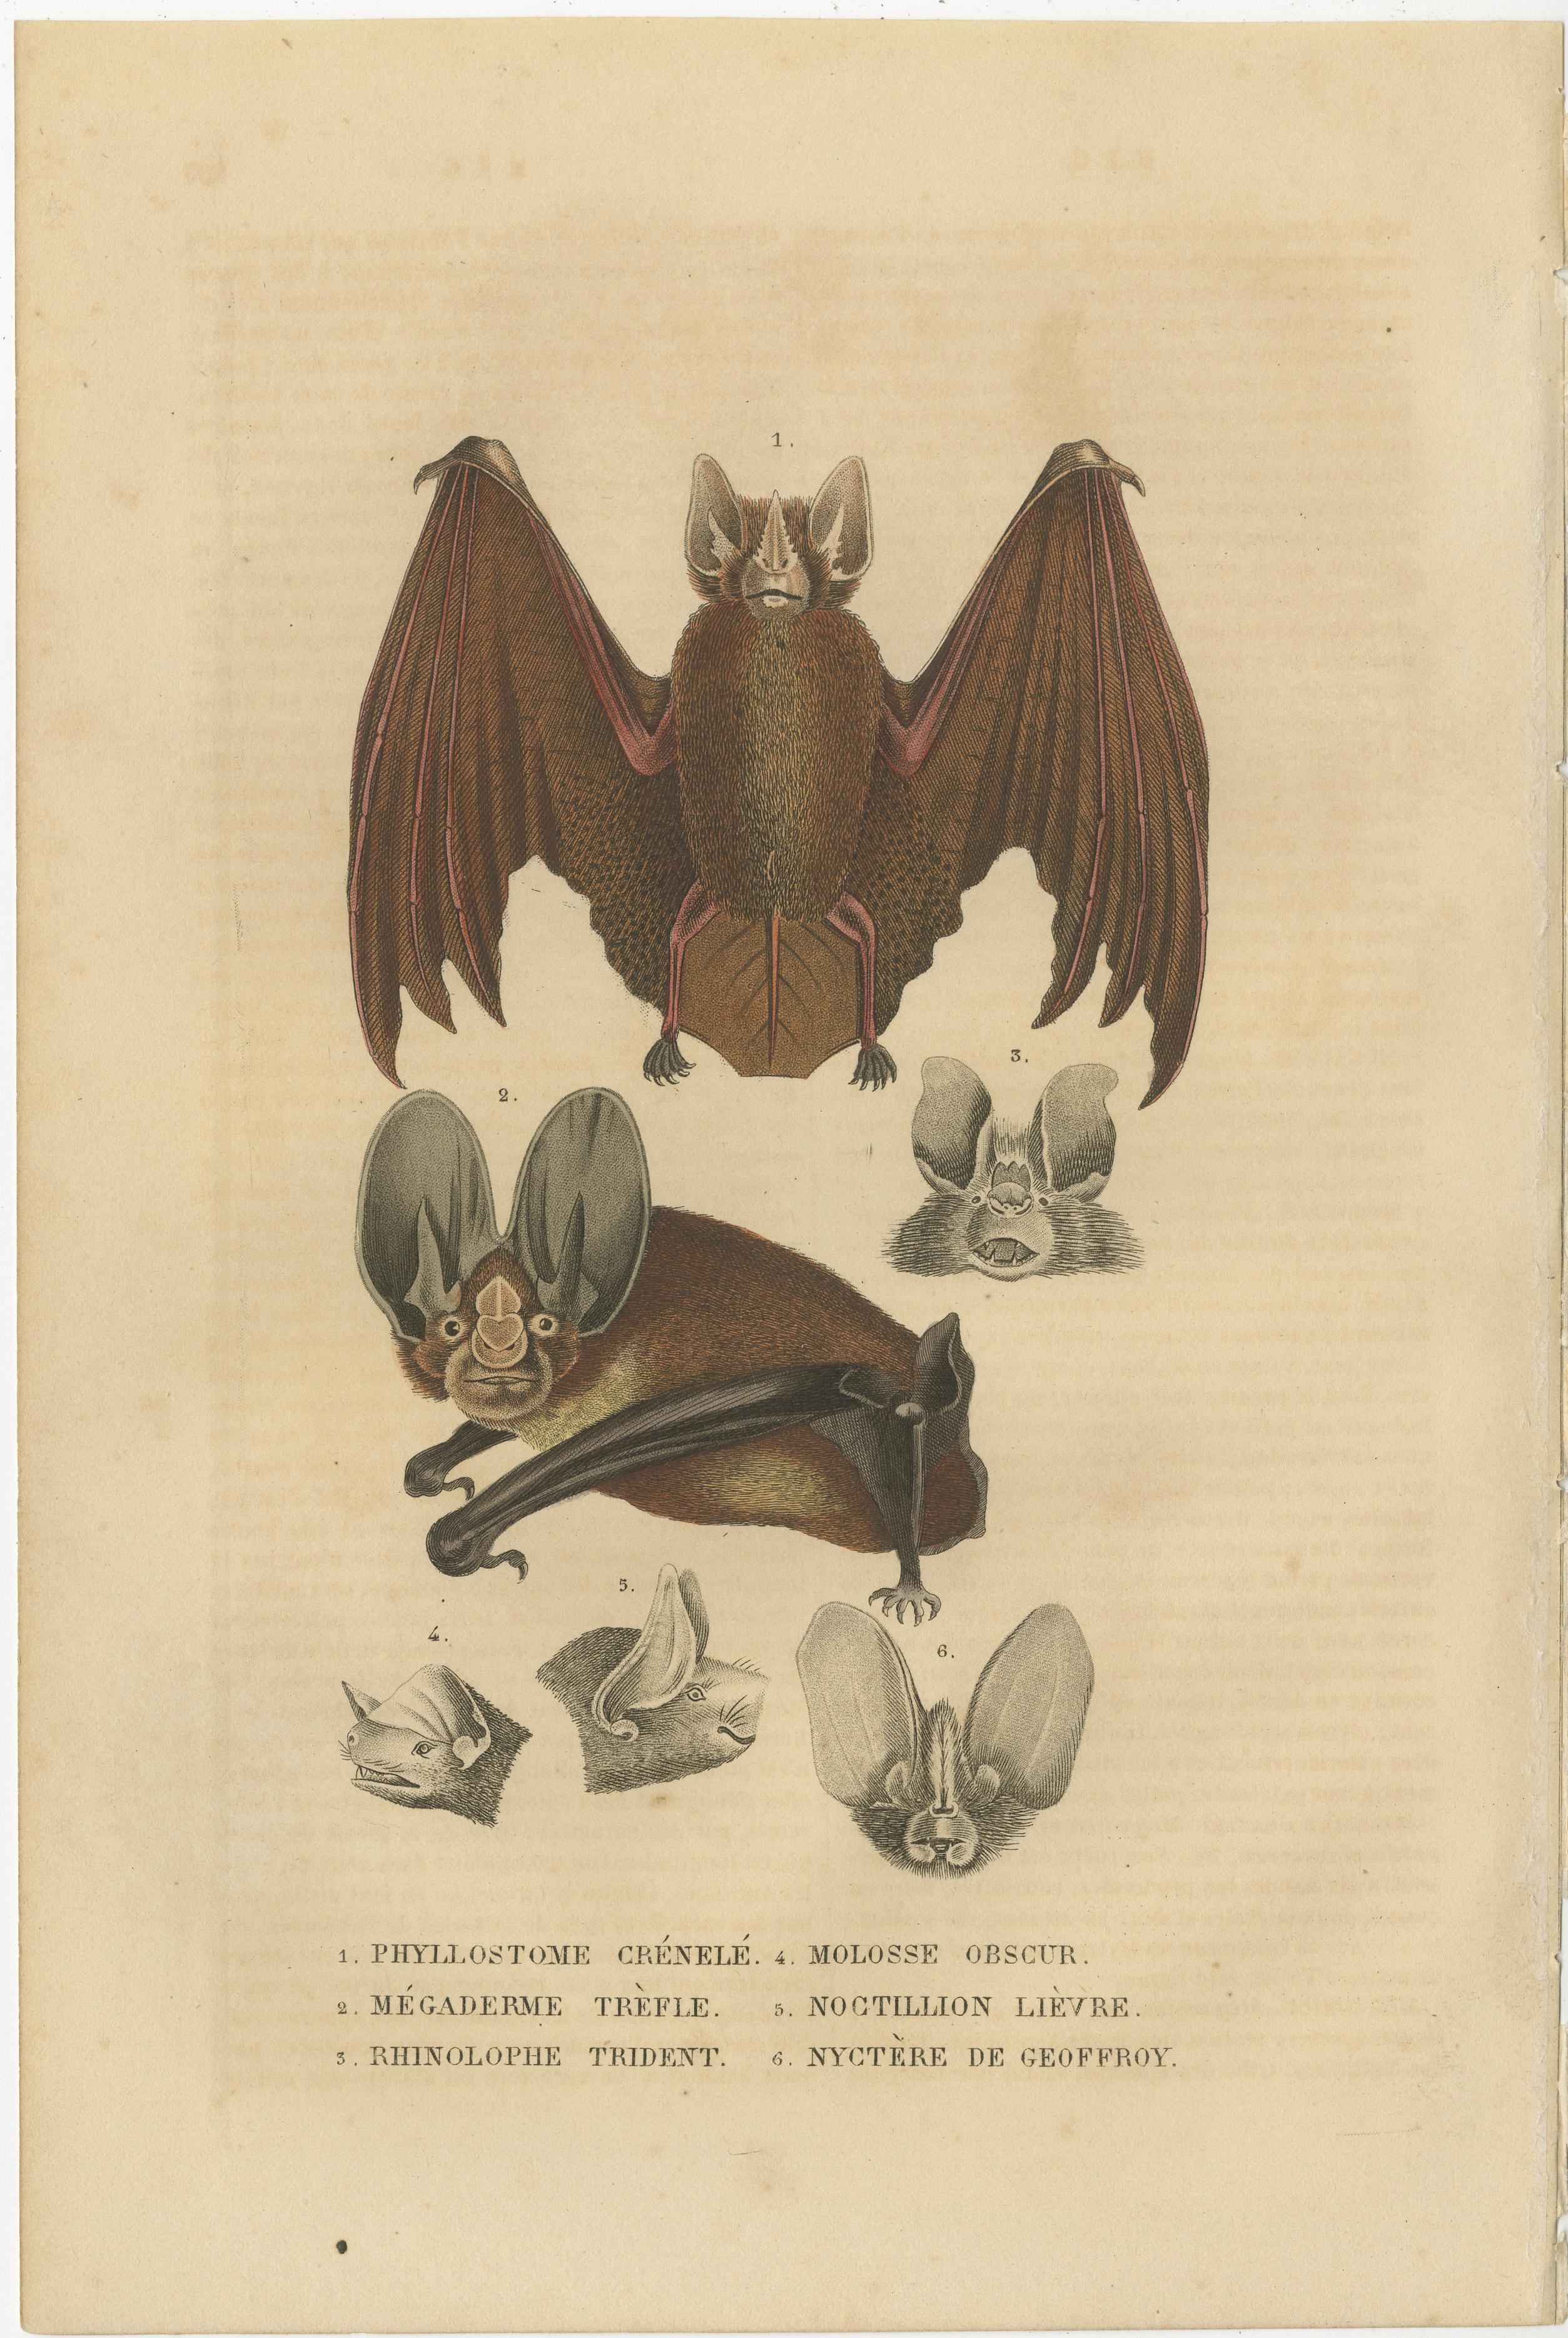 The print is an 1845 handcolored engraving that features a selection of six different bat species, each carefully illustrated to highlight their distinctive anatomical features. These bats represent a range of species, as indicated by their French